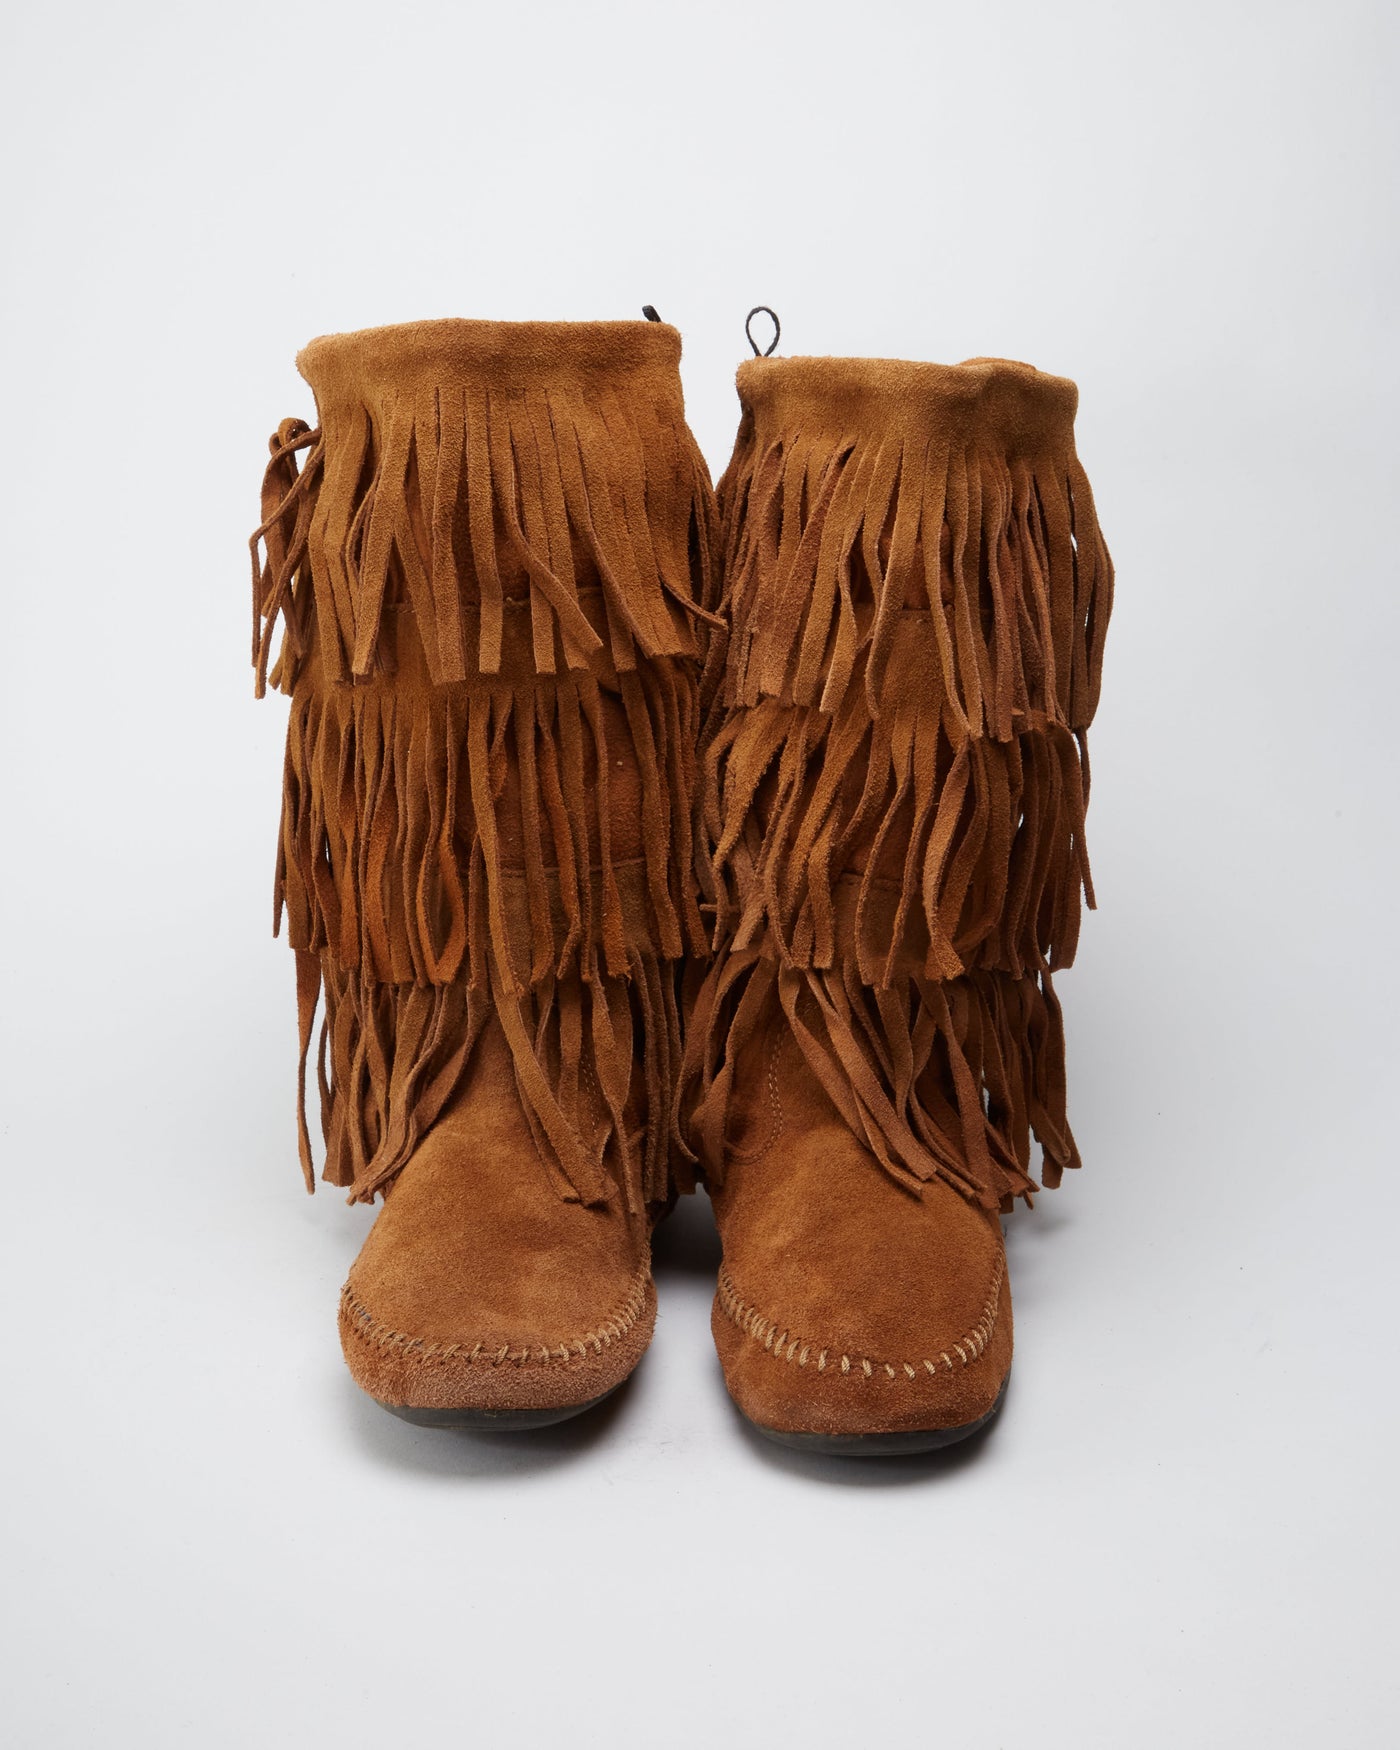 1970s style Suede Tassels Cowboy Boots - UK 8